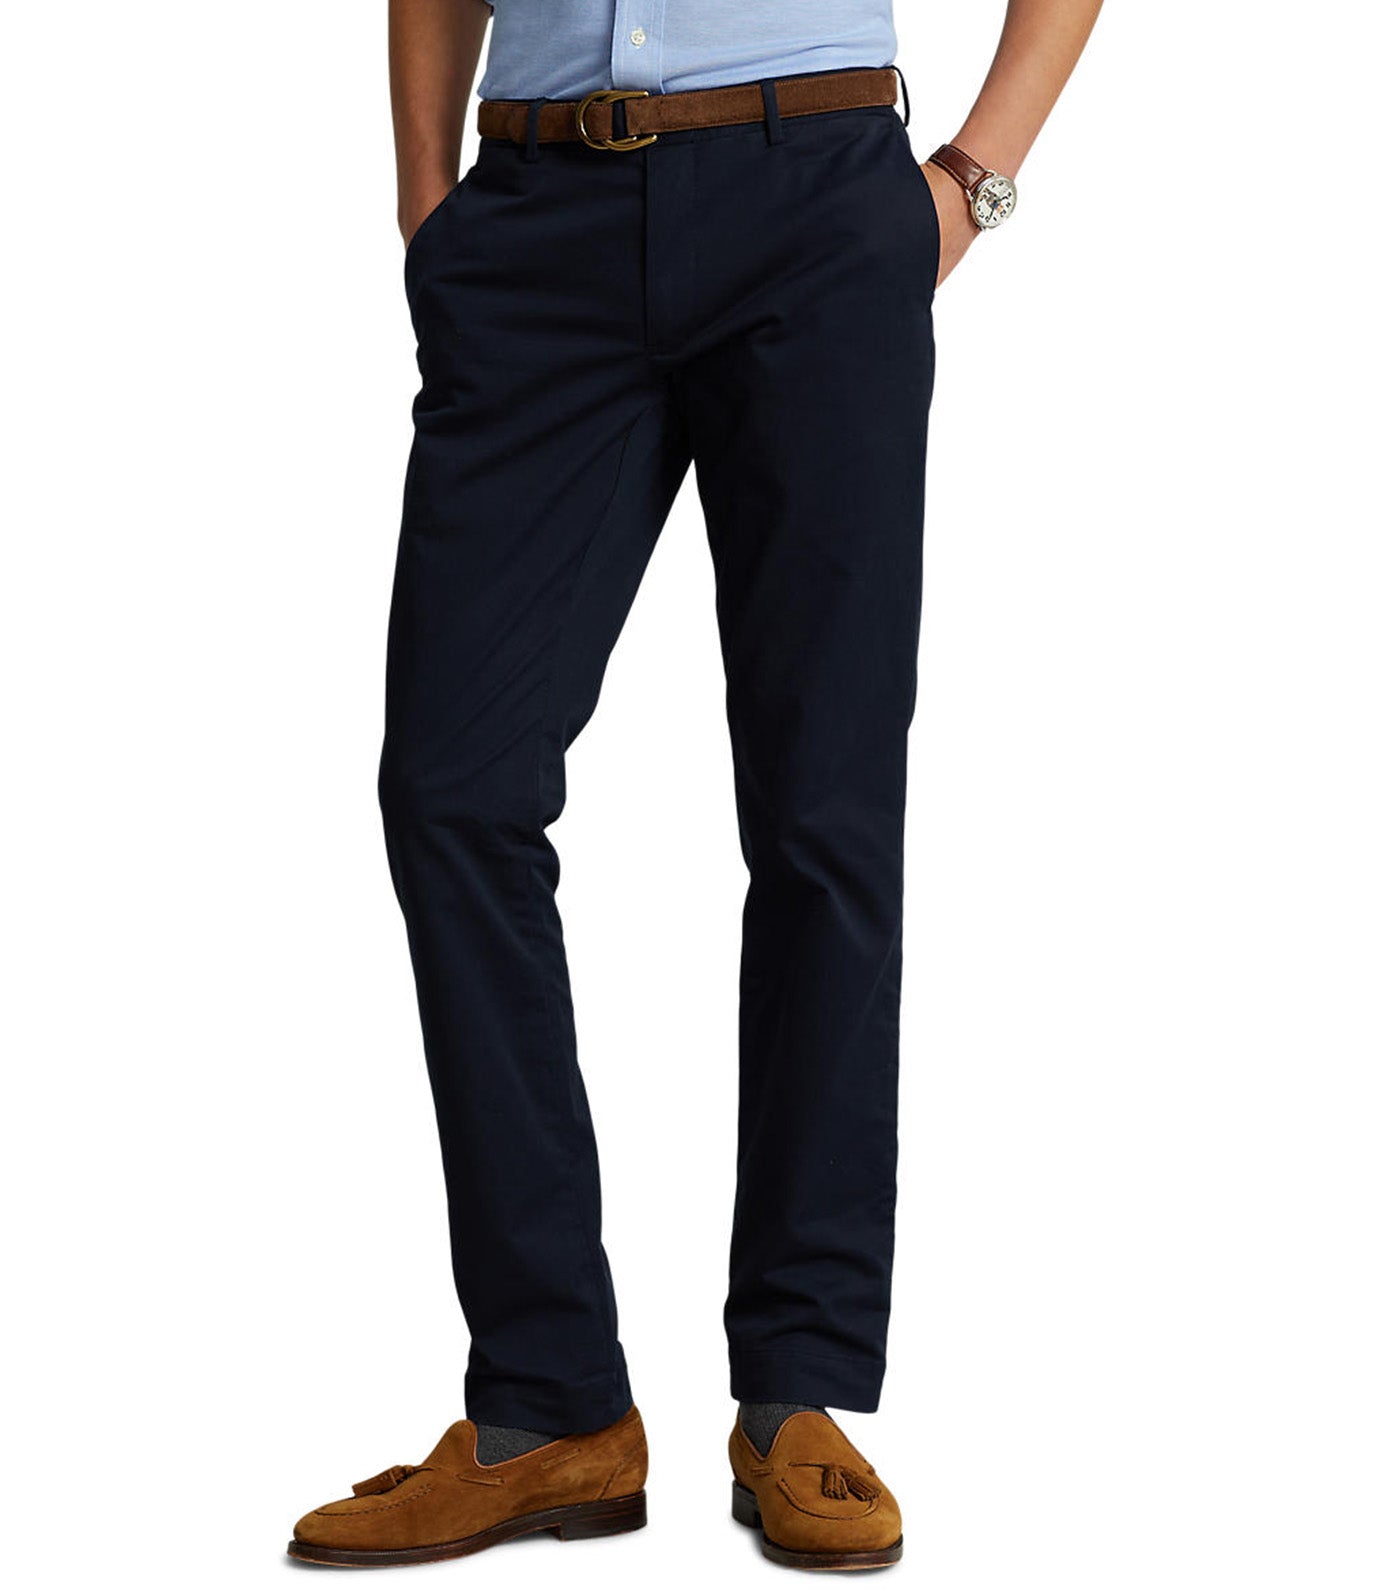 Slim fit chino pants by Charles Le Golf